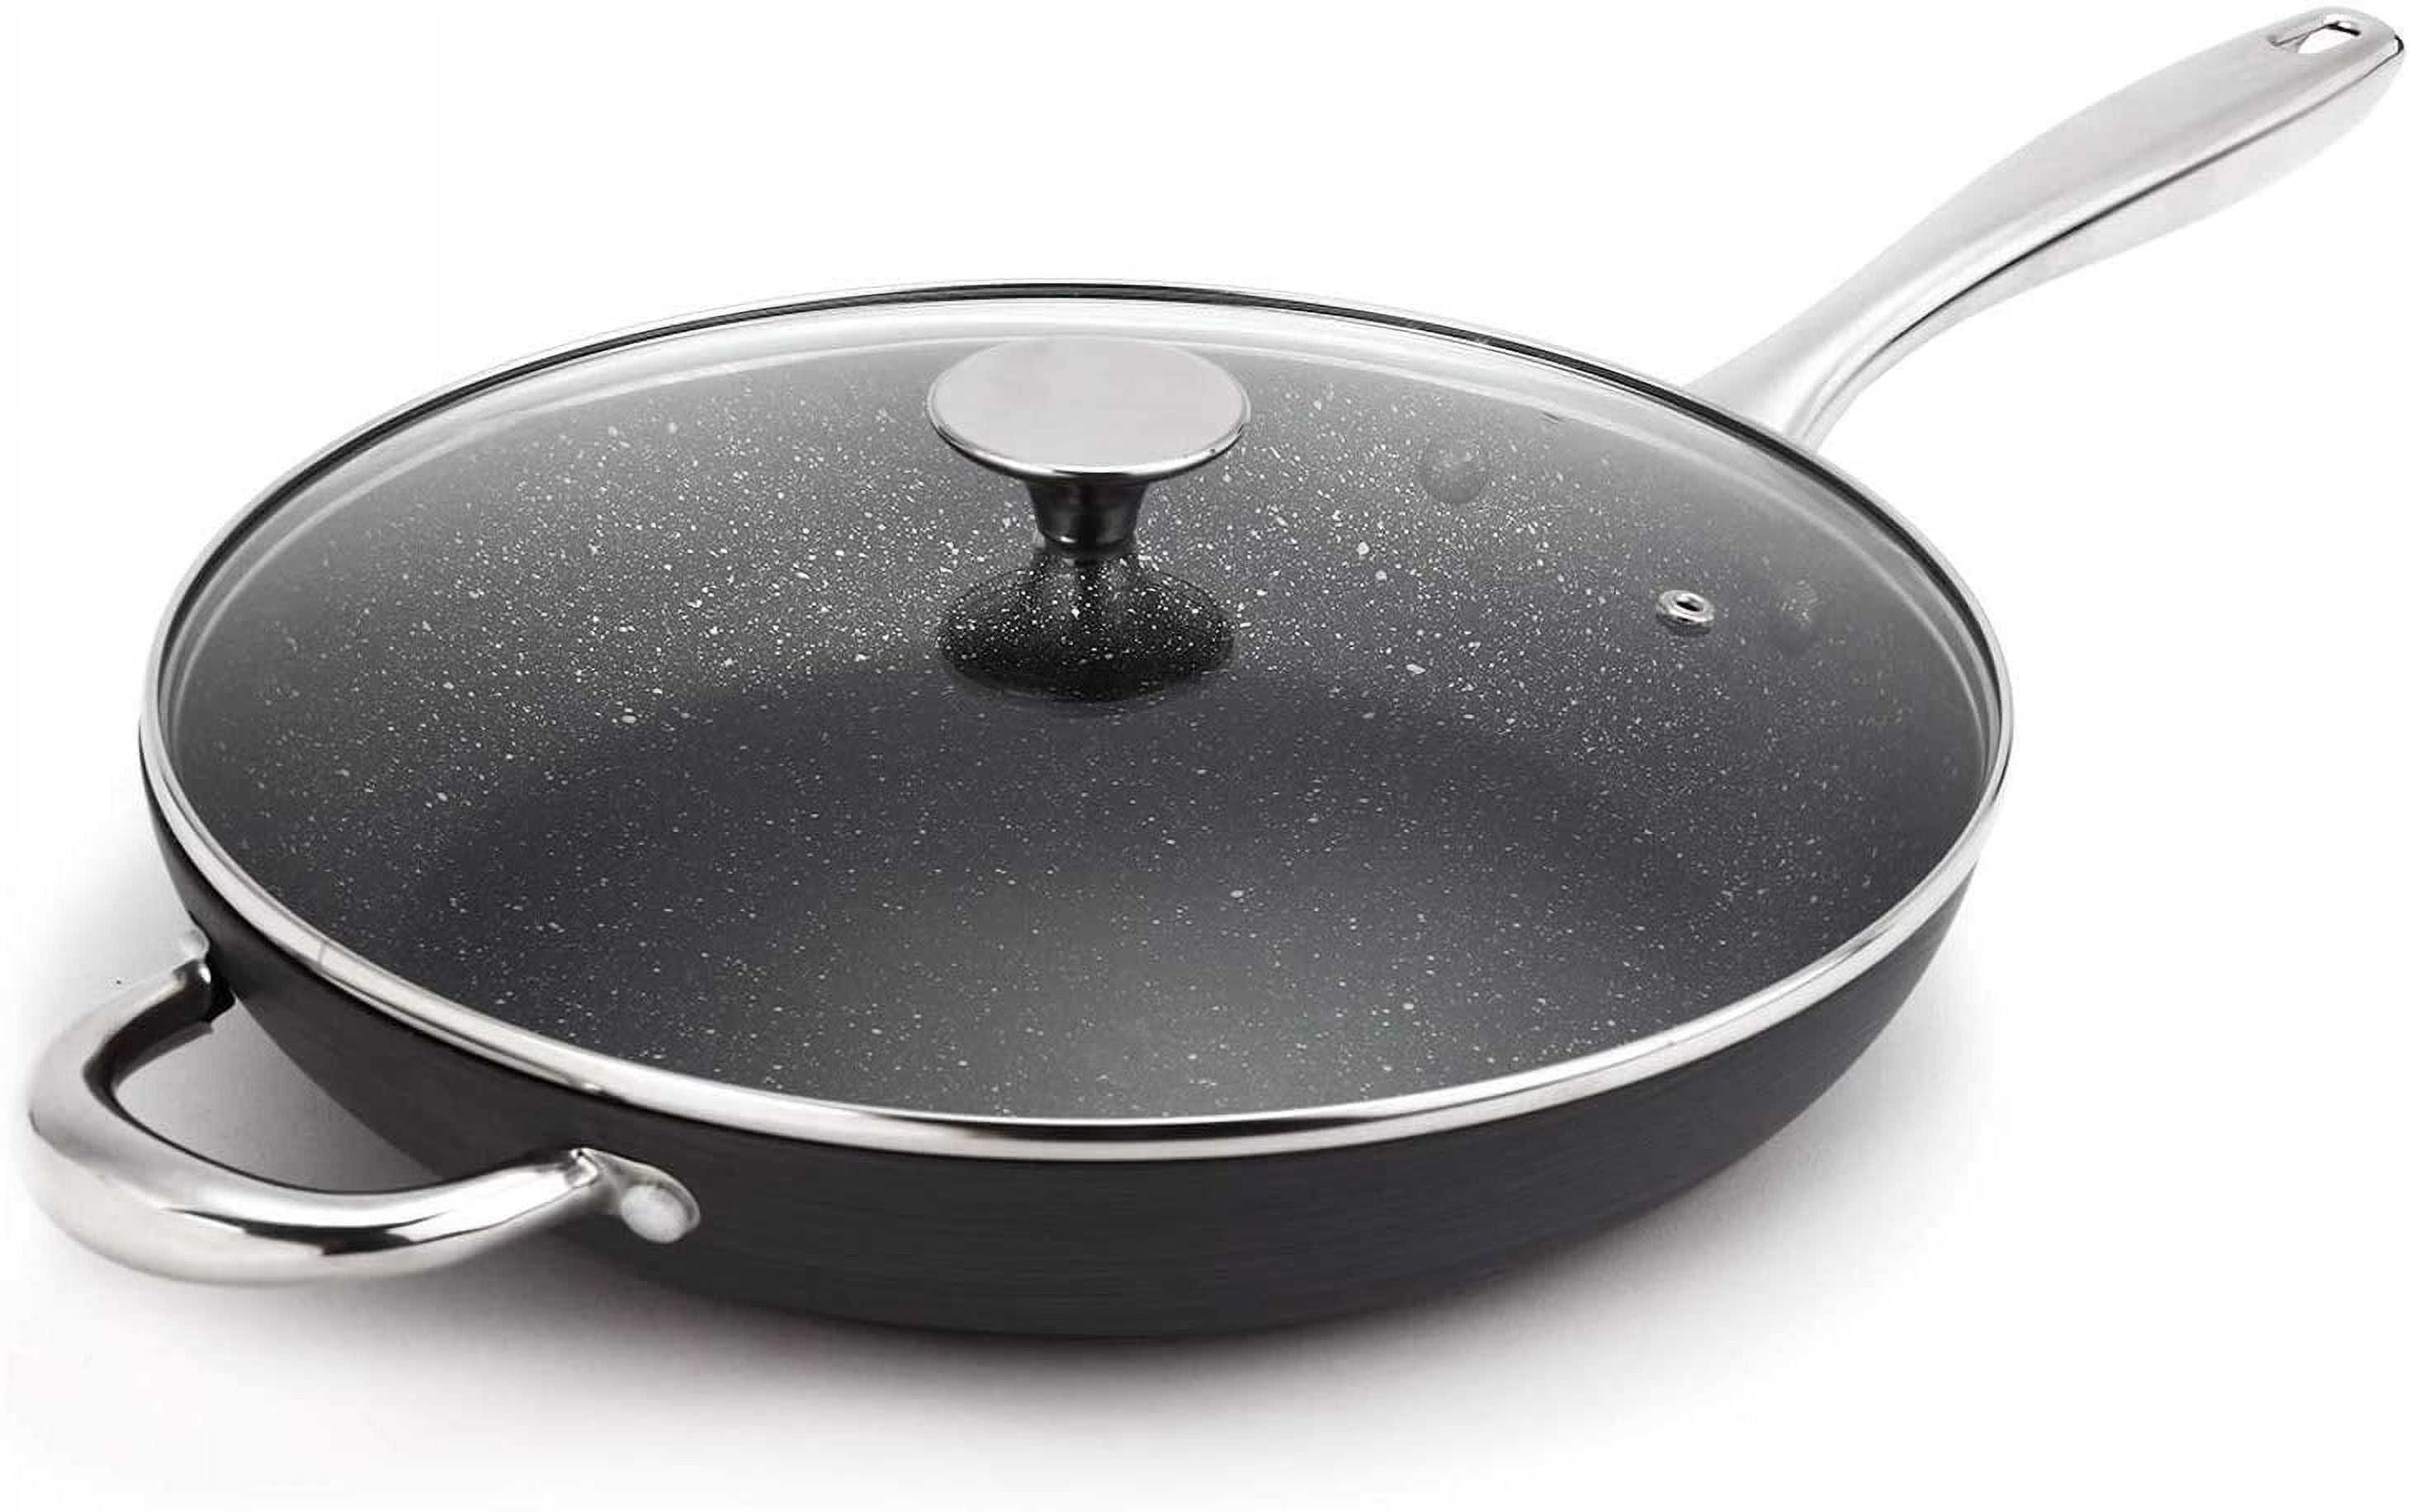 11.02 inch Stainless Large Frying Pan Nonstick Frying Pan w/ Lid +